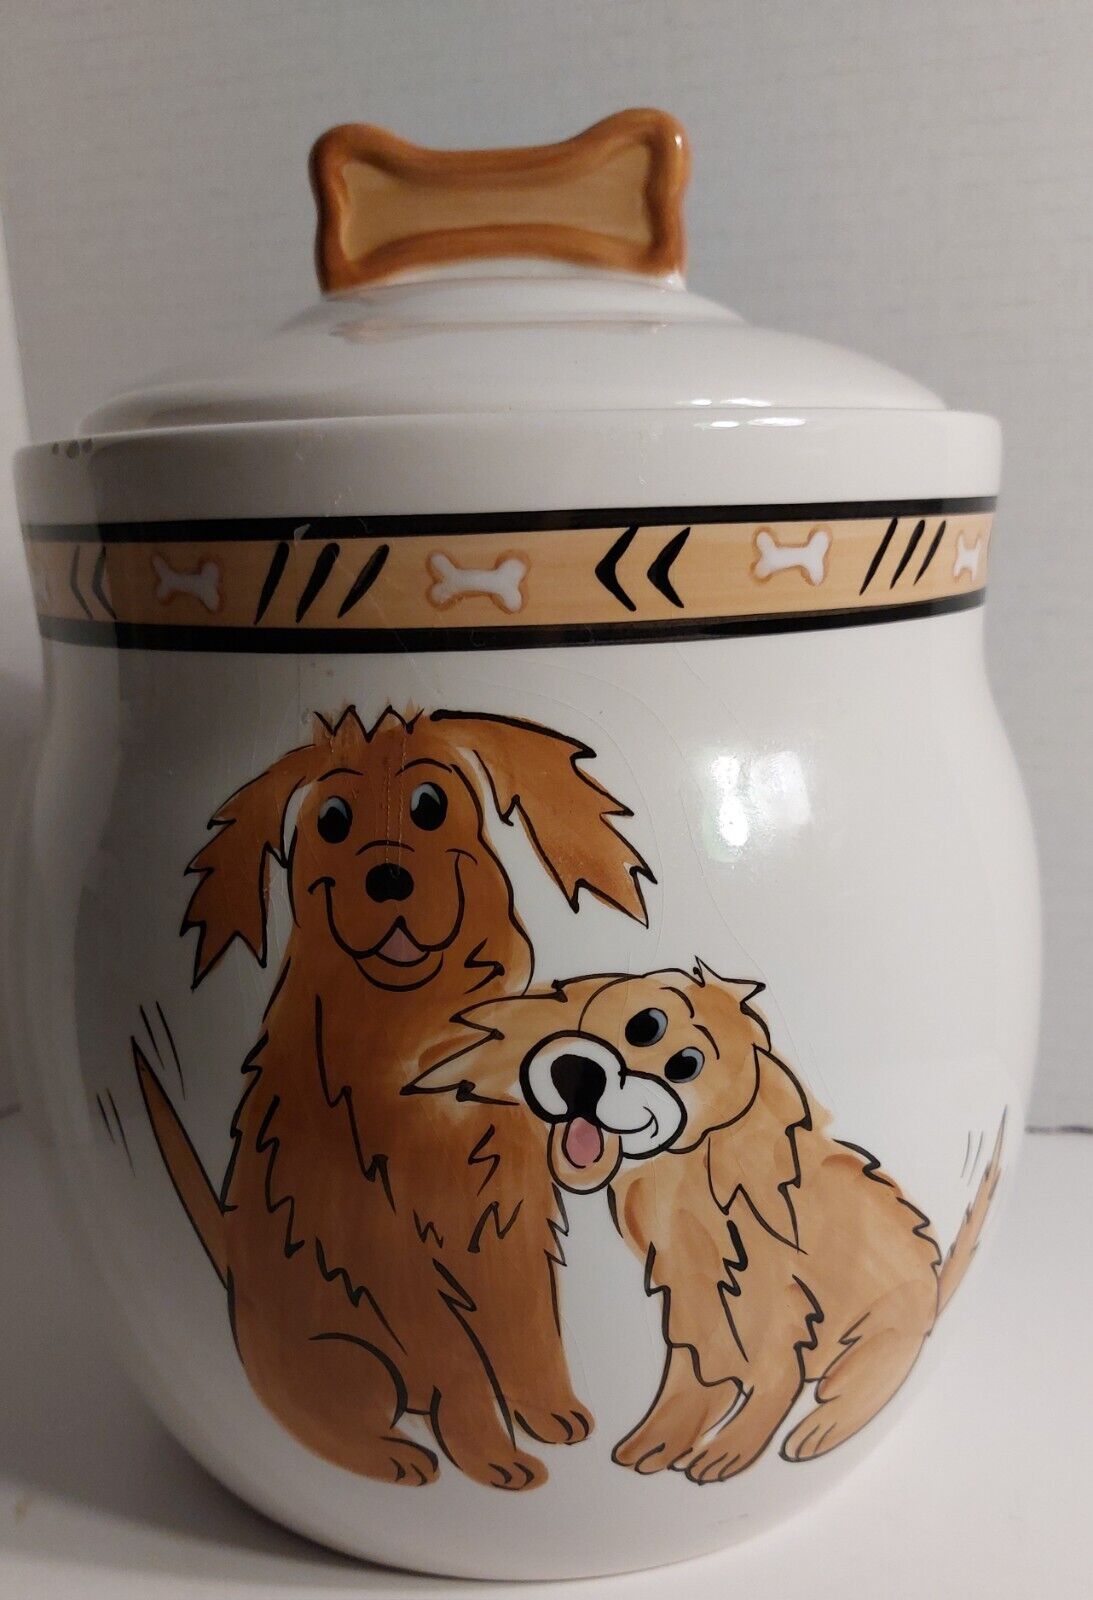 Treat Canister Puppy Dog Biscuit Cookie Jar Ceramic Hand Painted Inspirado